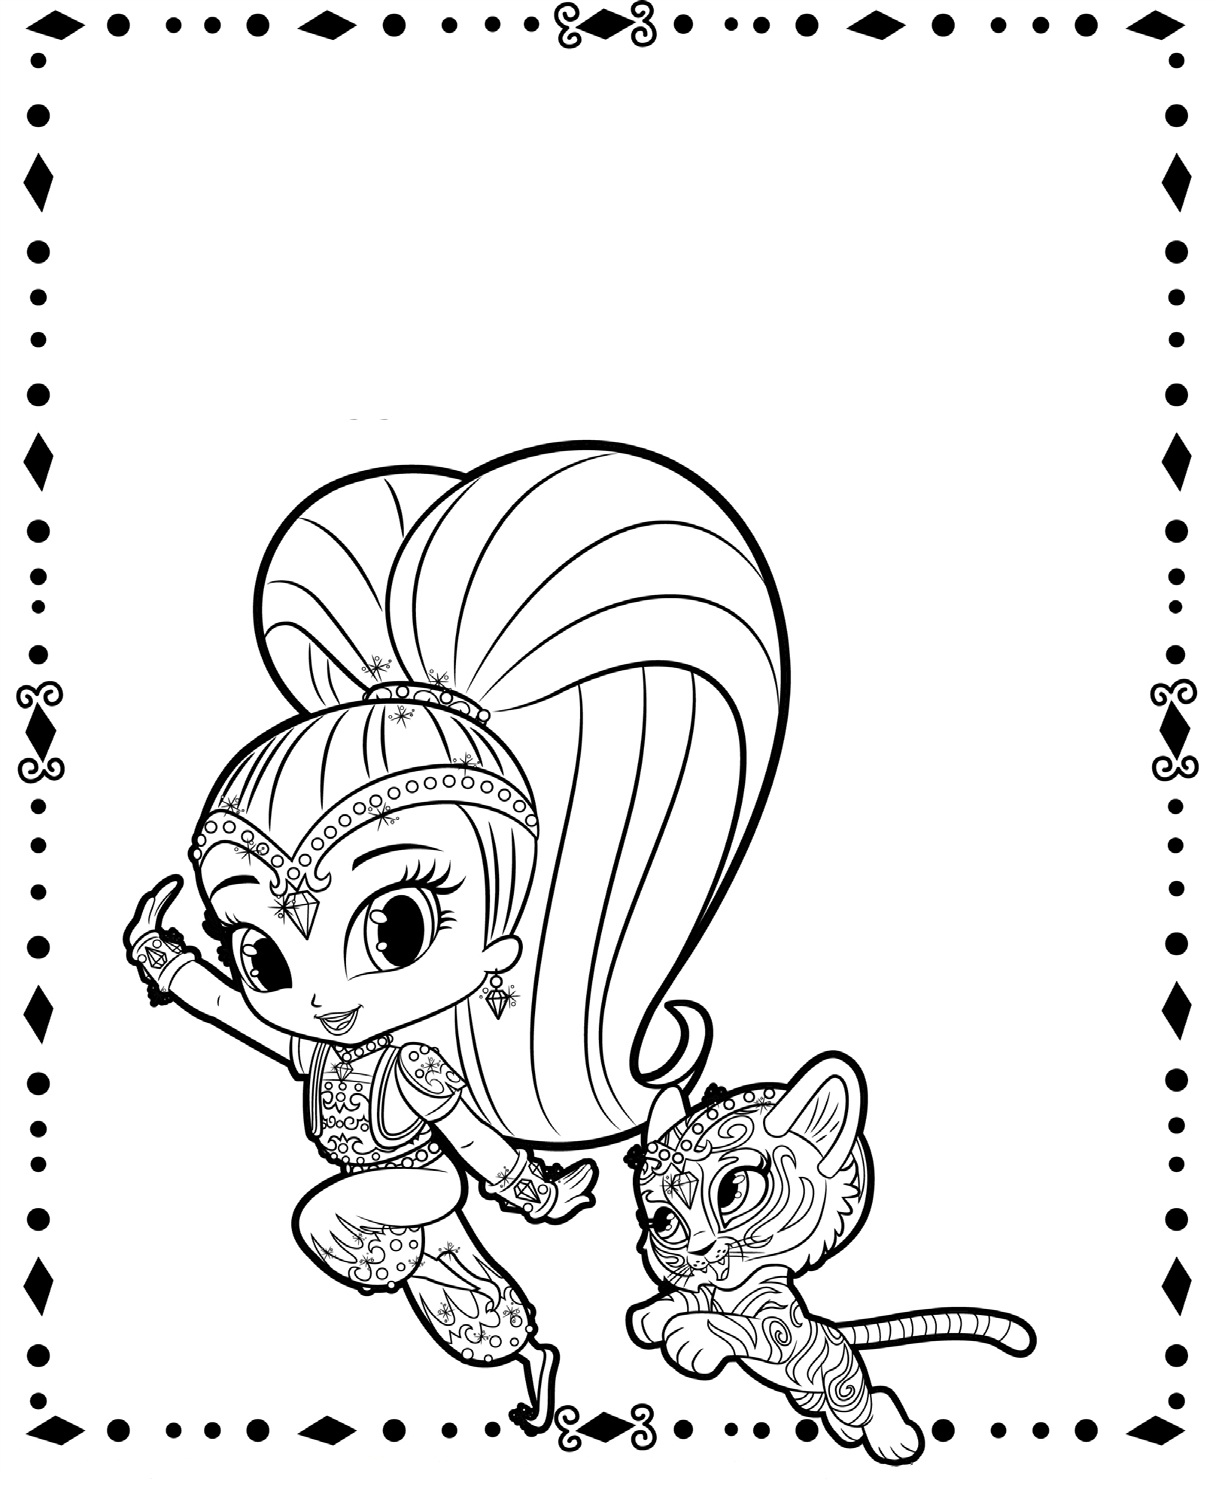 Shimmer and Shine coloring pages to download and print for free